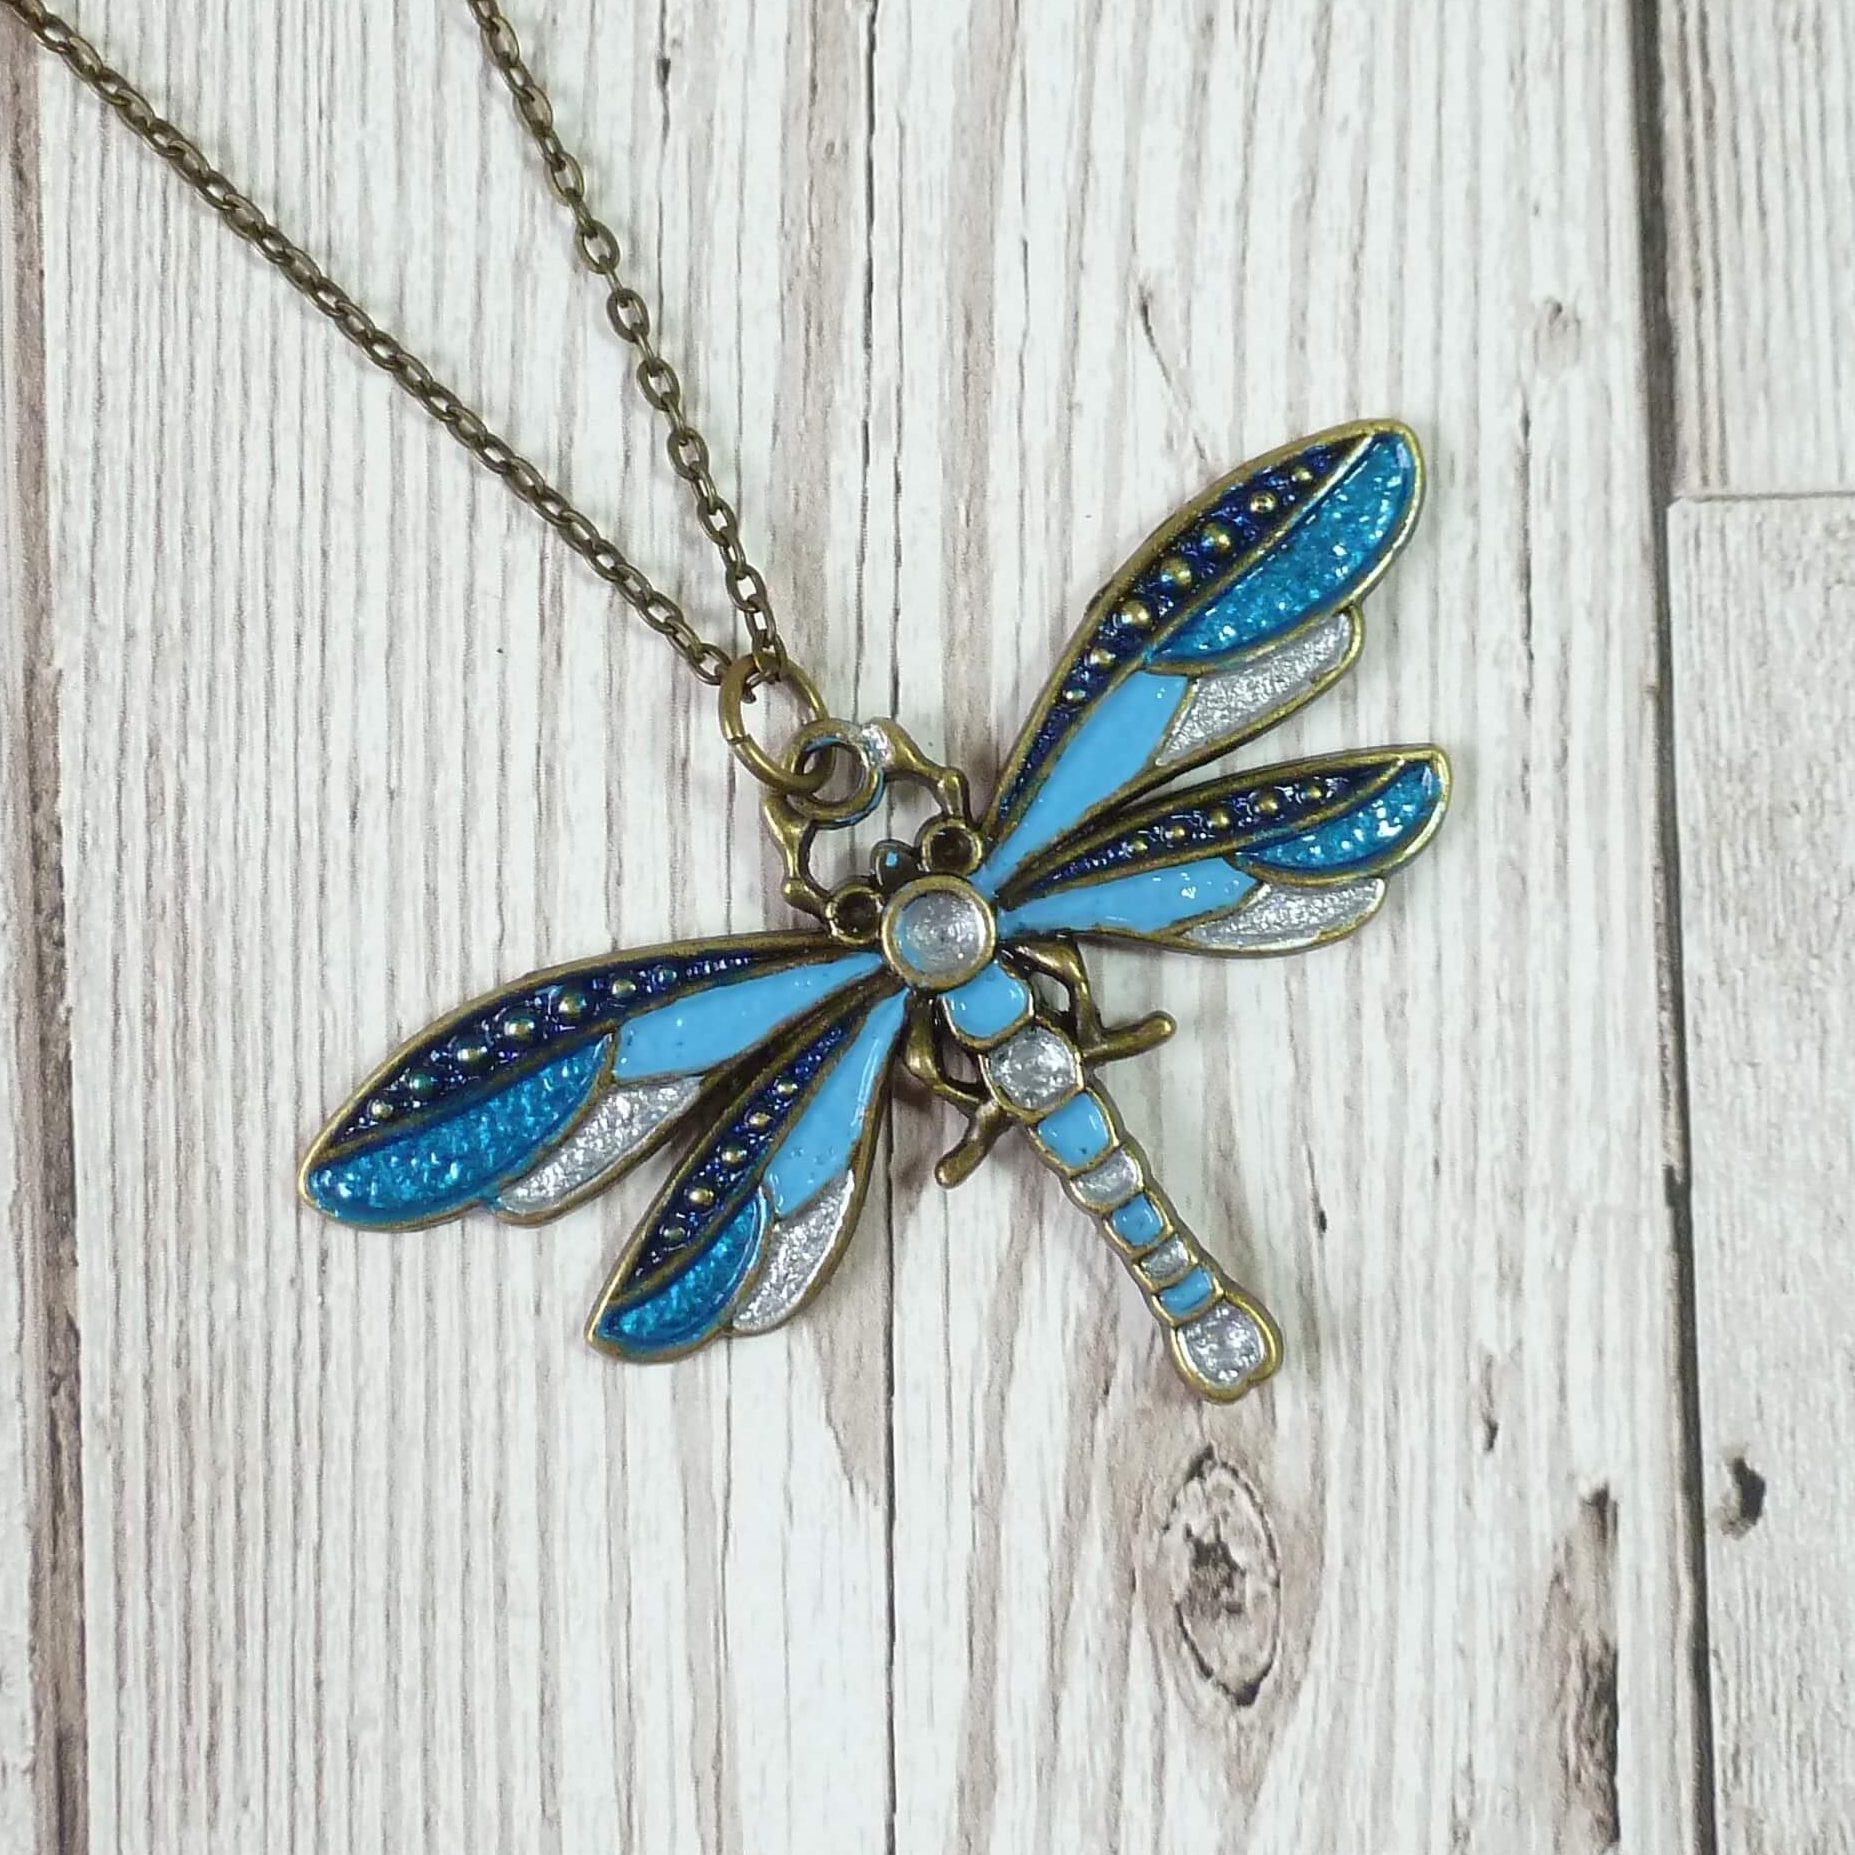 Dragonfly Dreams Necklace for Kids - Small dragonfly necklace for children.  – Holly Yashi